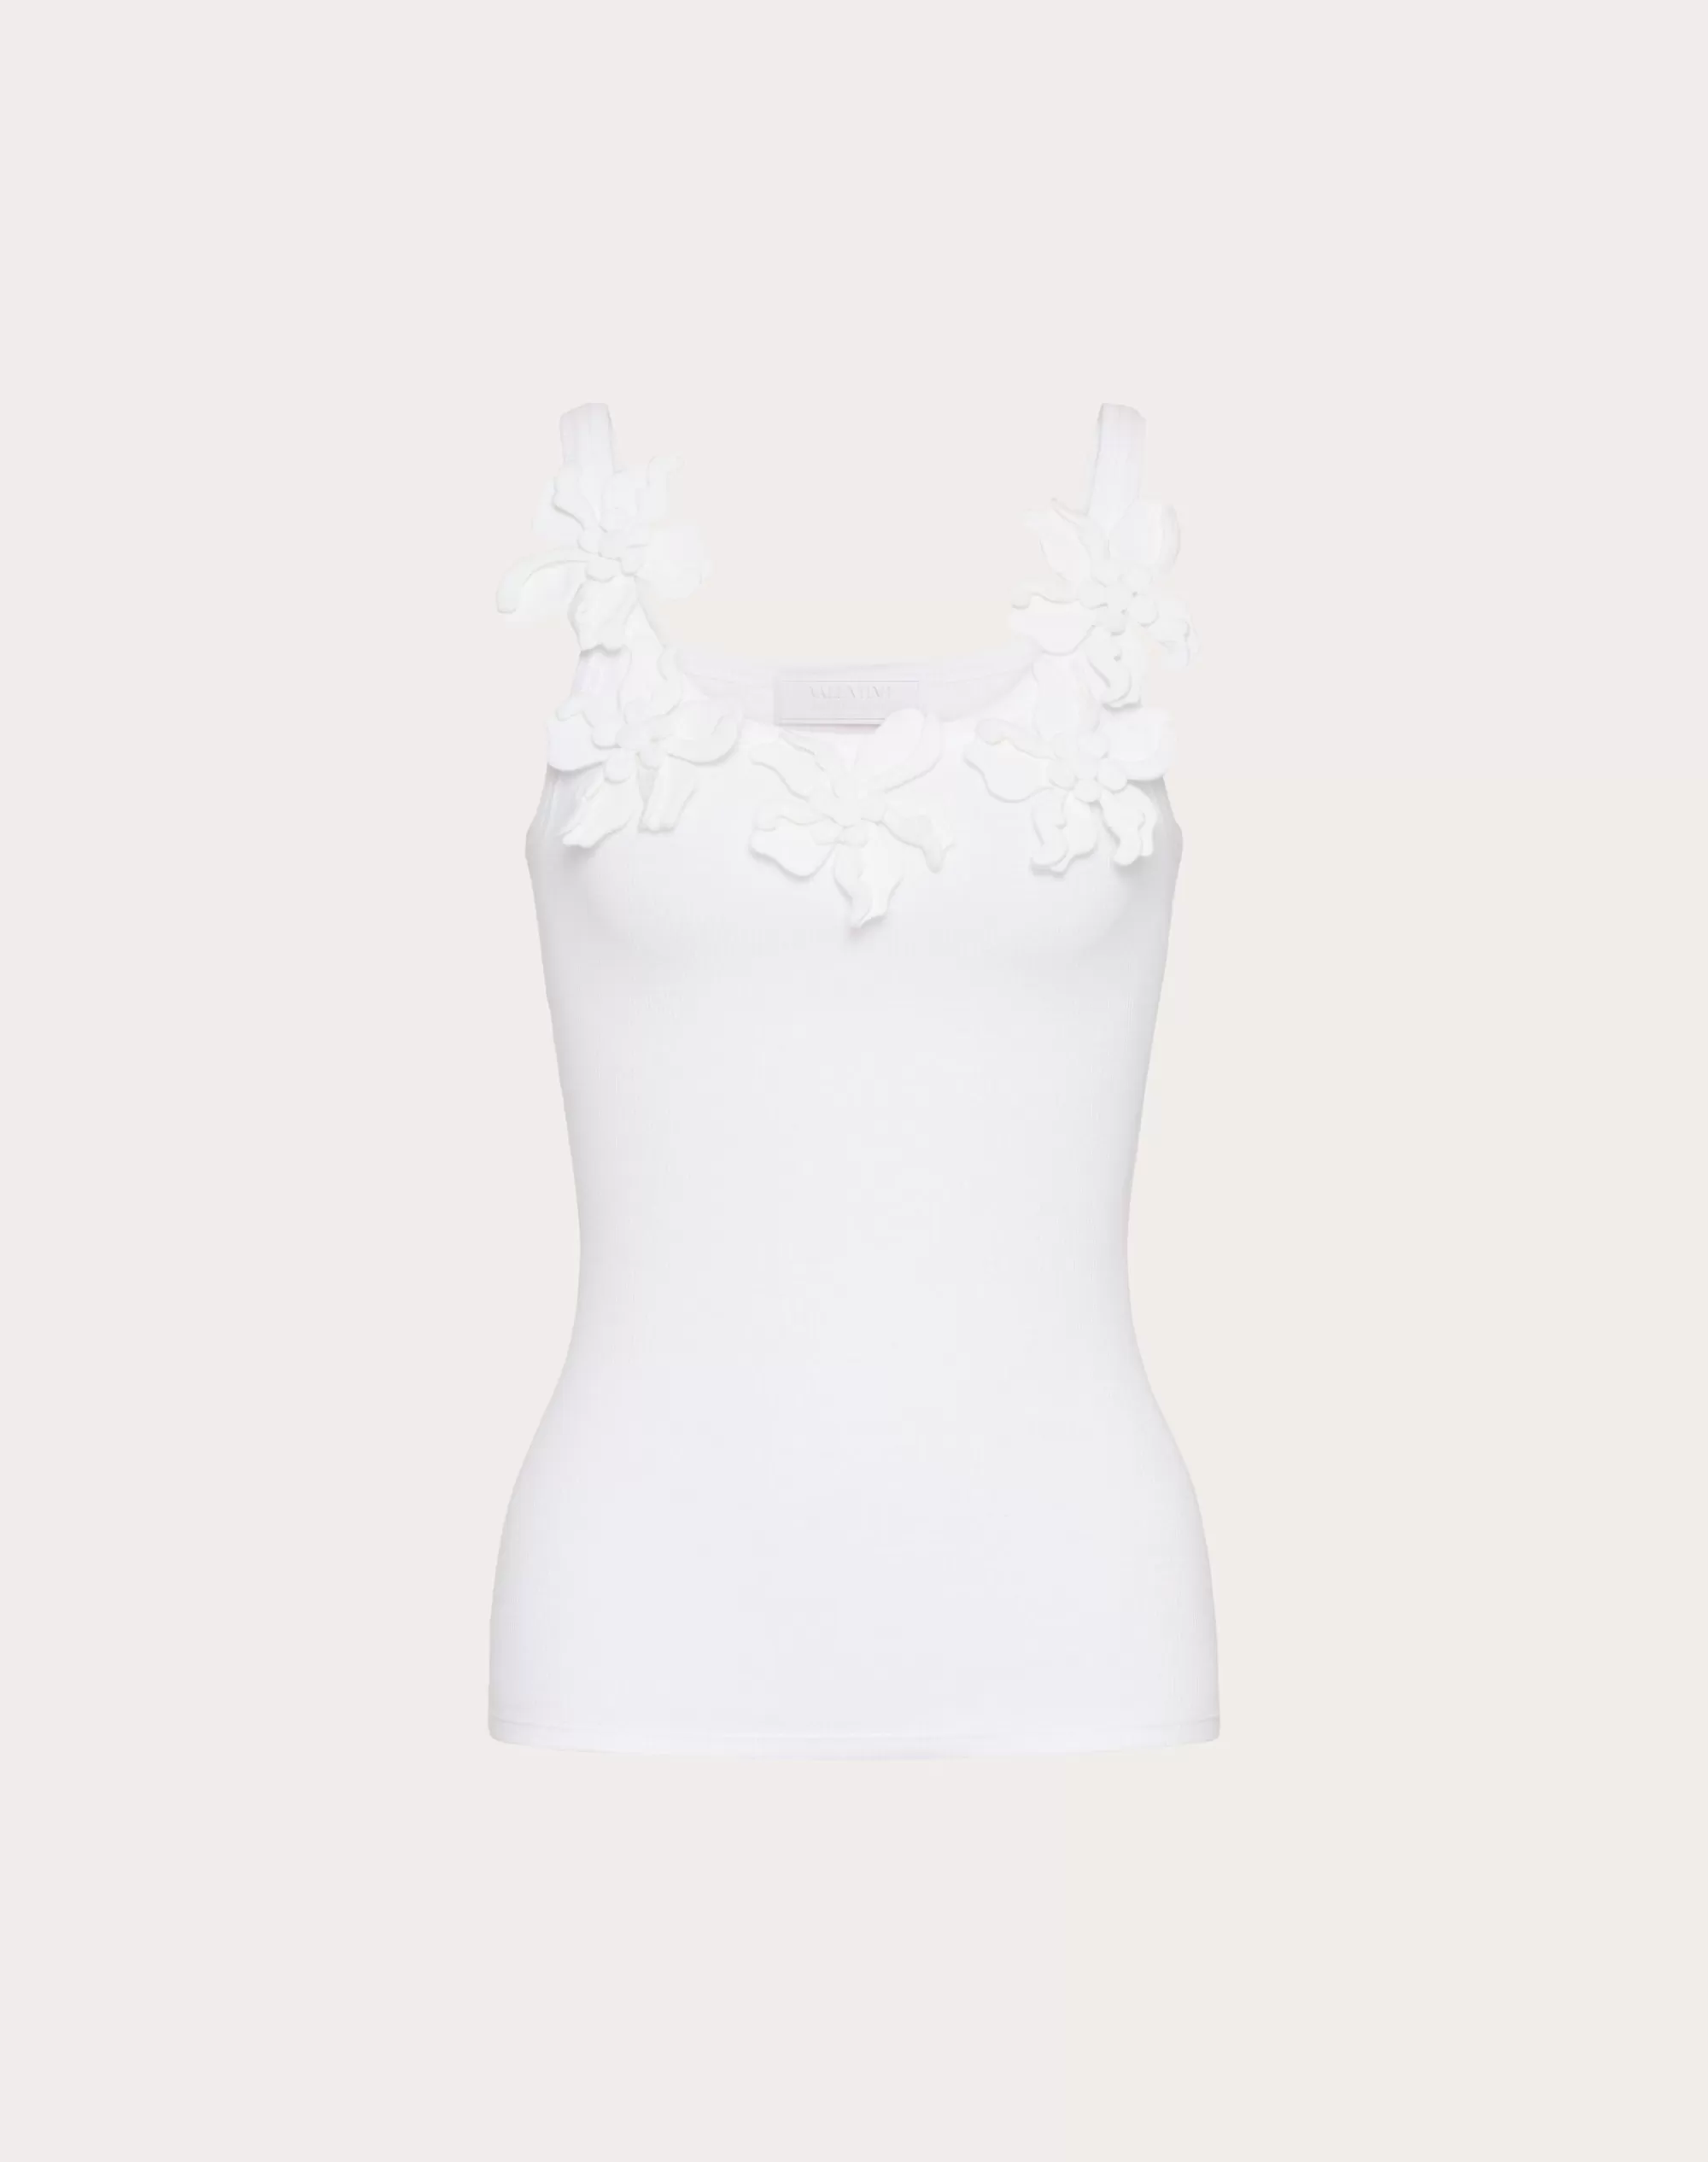 Valentino EMBROIDERED COTTON JERSEY TOP White Best